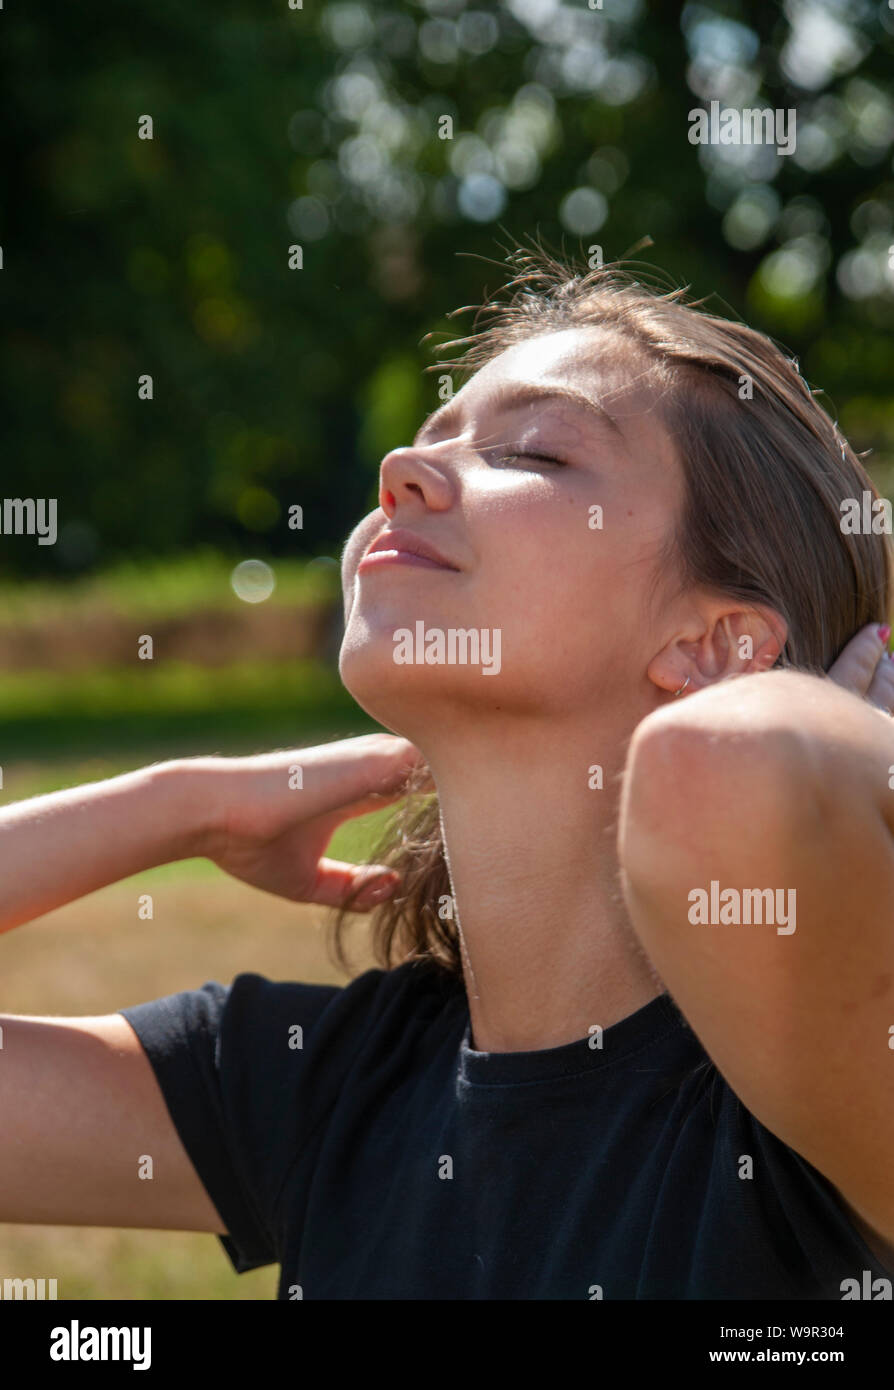 Tennage girl dressed in black sits on grass pulls back hair face to sun Stock Photo